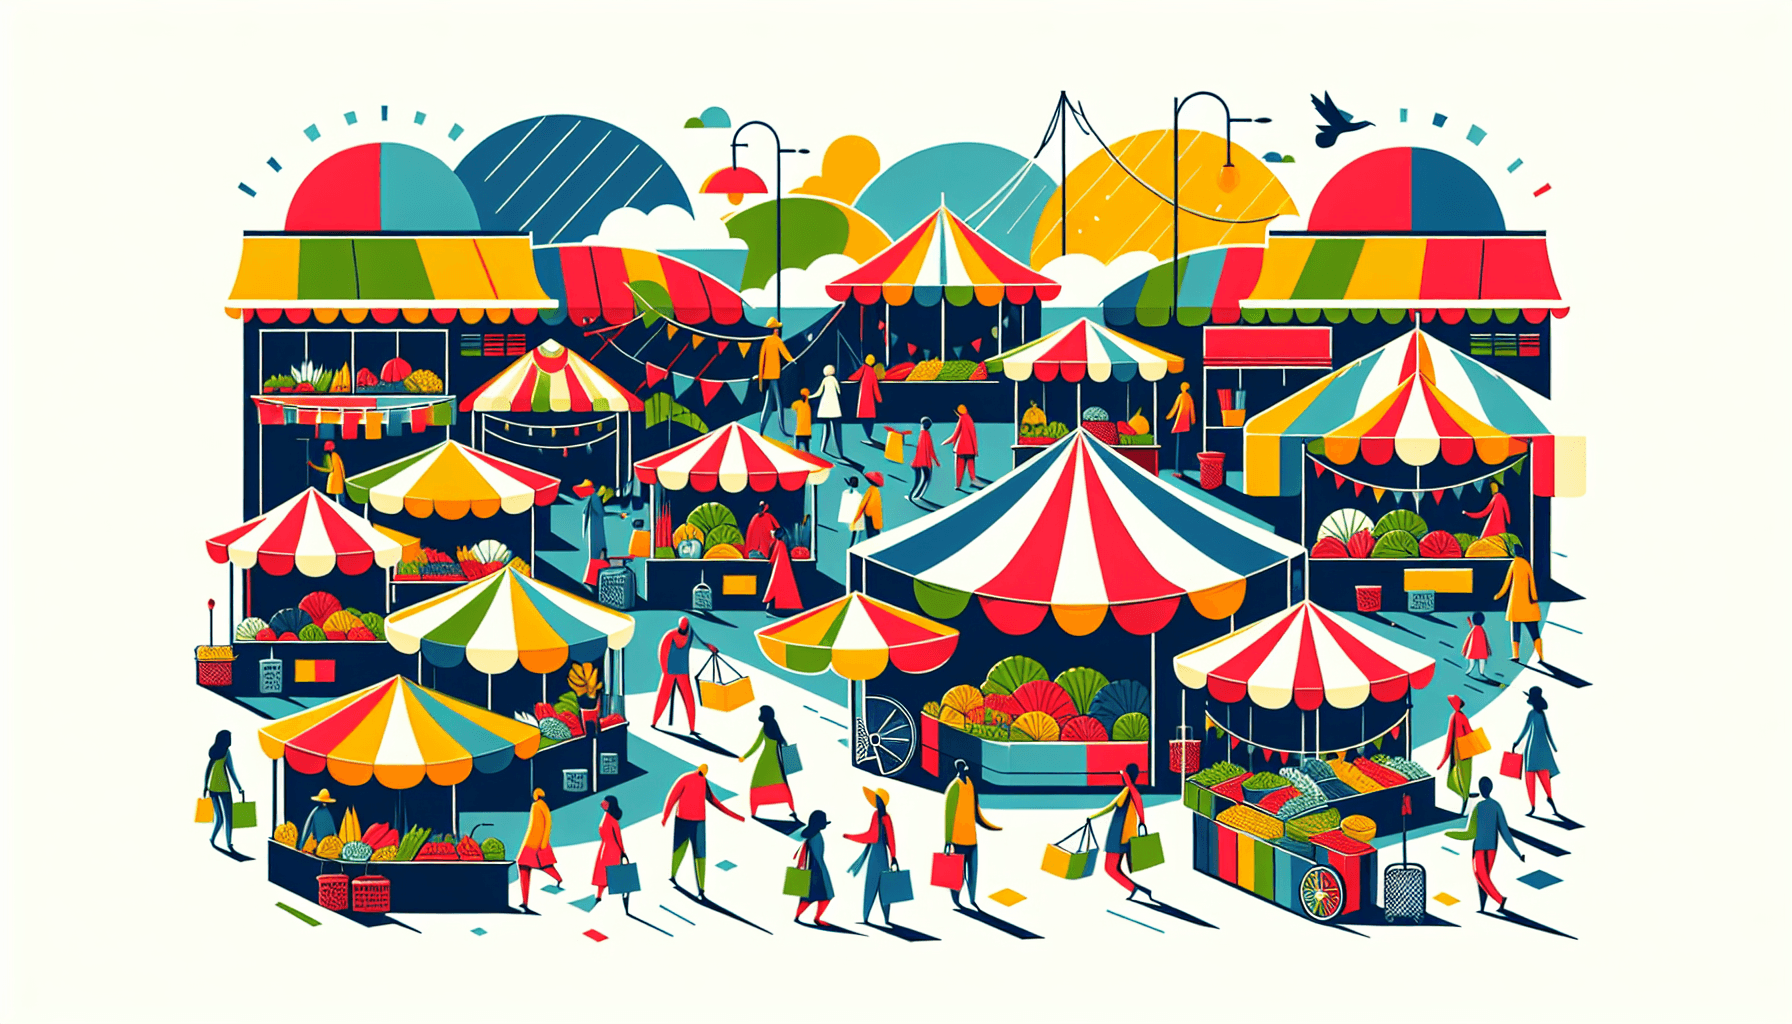 Market in flat illustration style and white background, red #f47574, green #88c7a8, yellow #fcc44b, and blue #645bc8 colors.